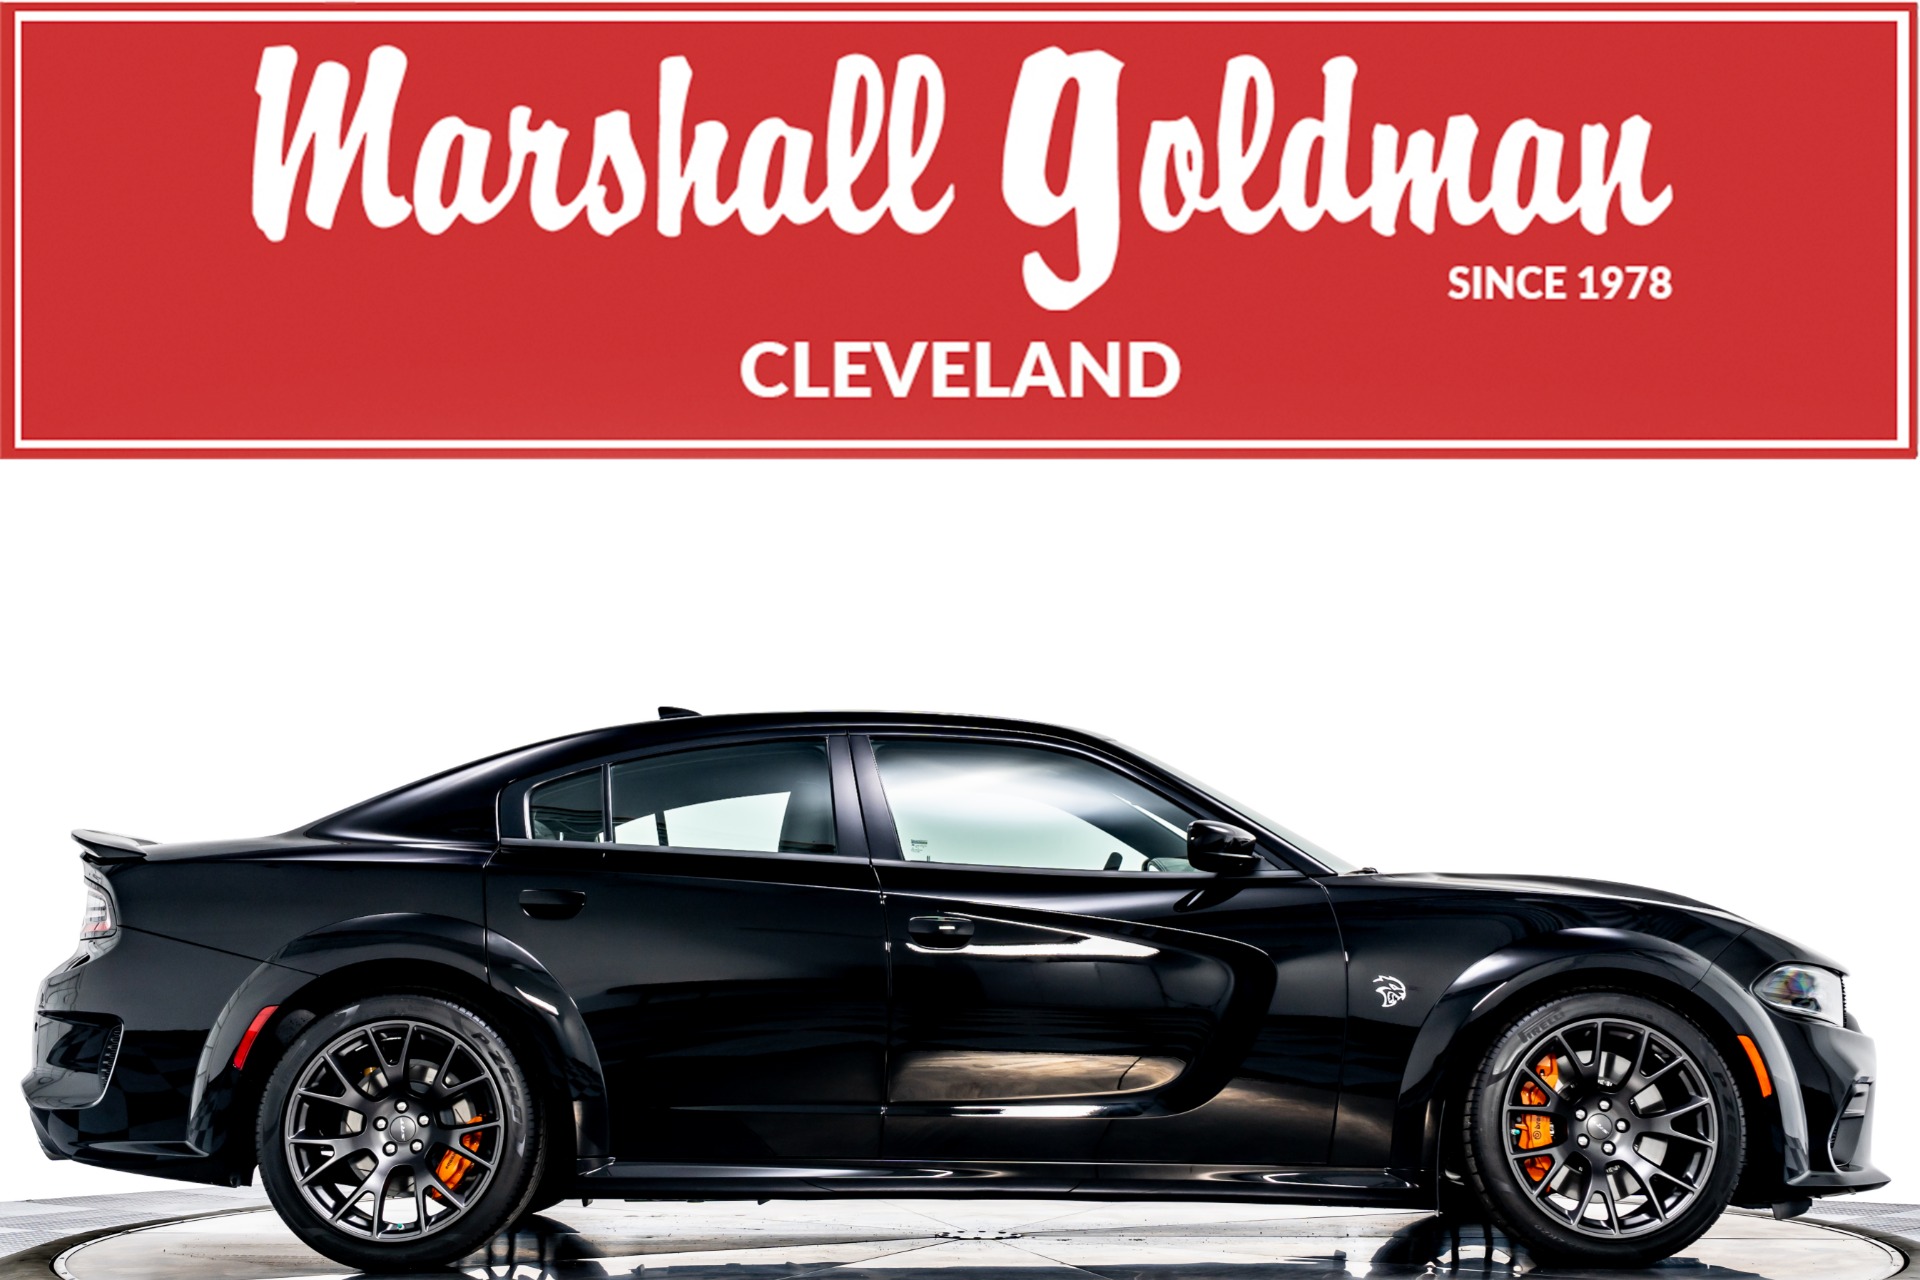 Used 2020 Dodge Charger SRT Hellcat Widebody For Sale (Sold) | Marshall  Goldman Cleveland Stock #WCHCWB